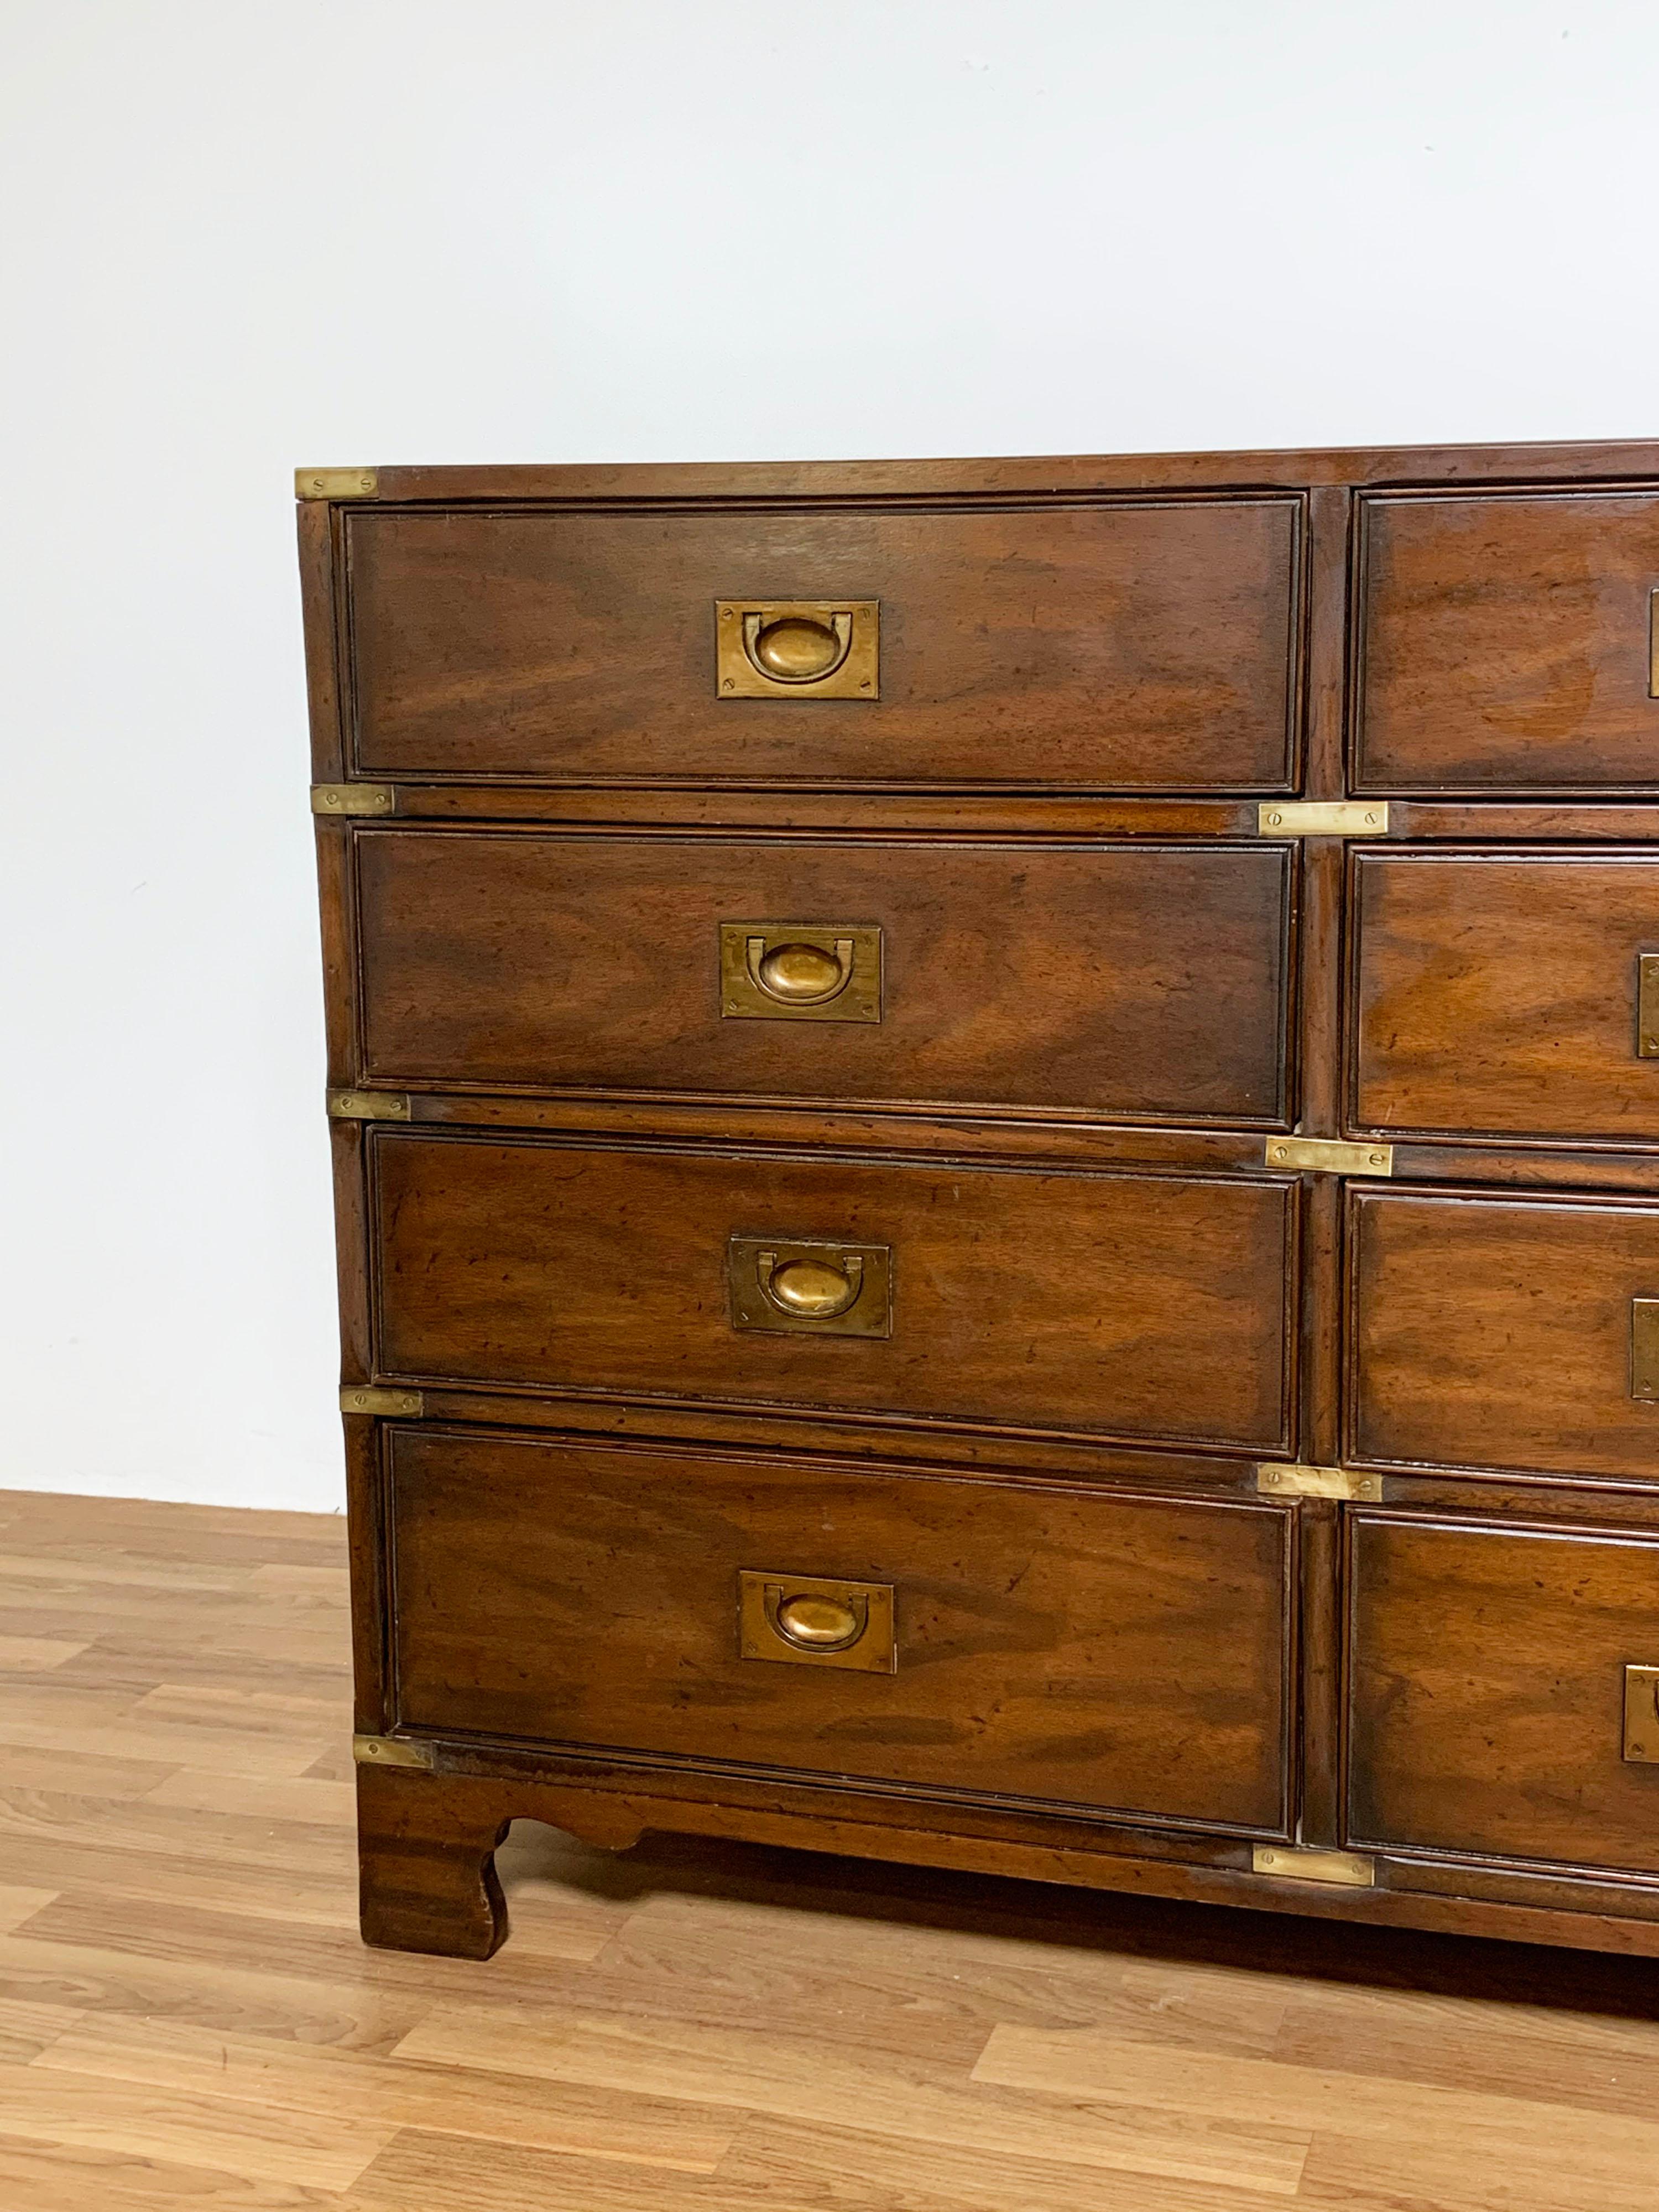 A long campaign style chest with twelve drawers in walnut with brass accents by Heritage Henredon, ca. 1960s.